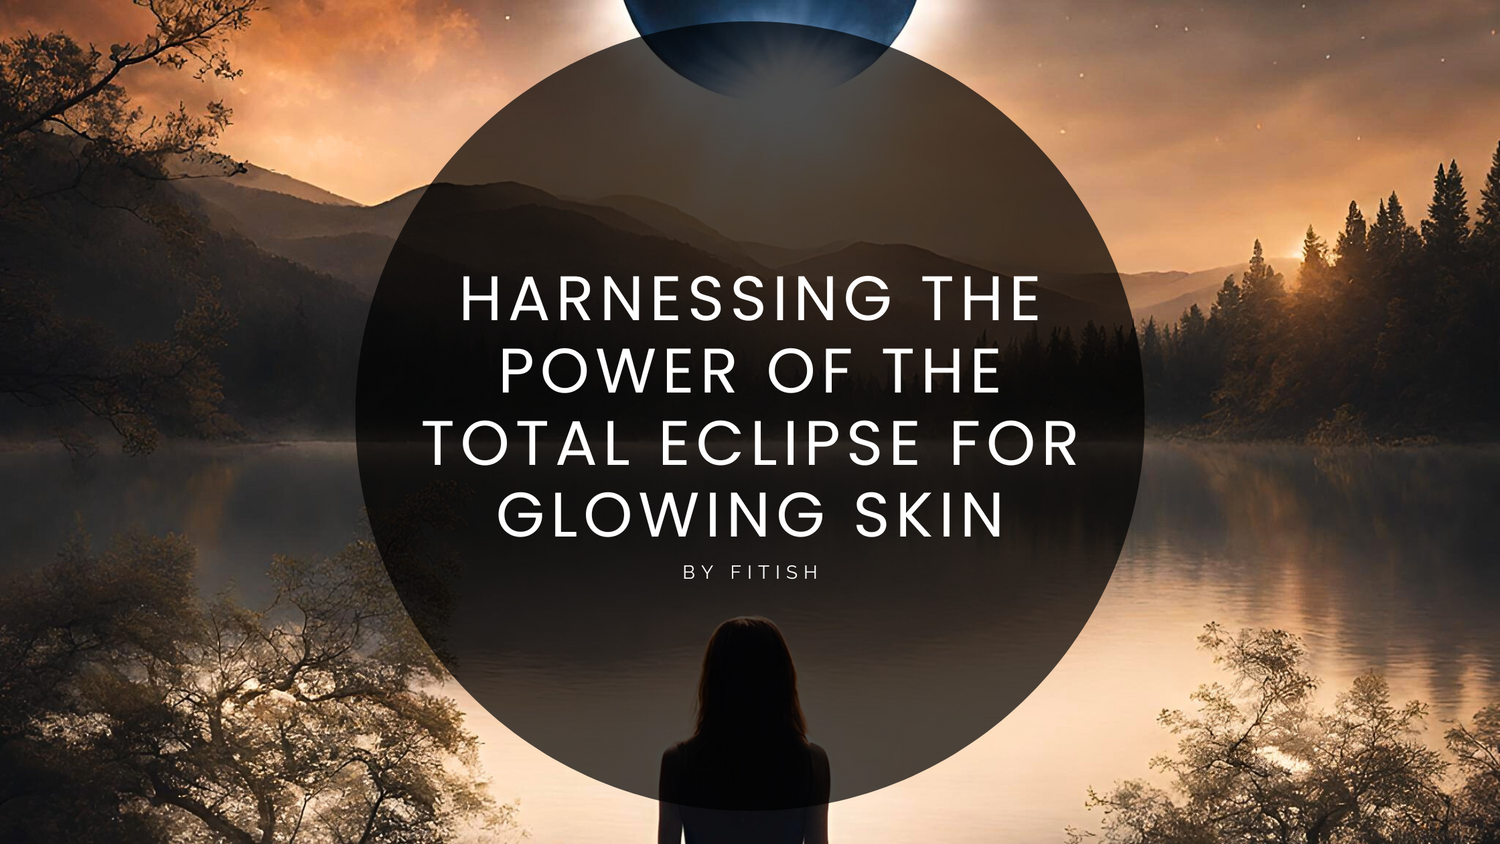 Harnessing the Power of the Total Eclipse for Glowing Skin